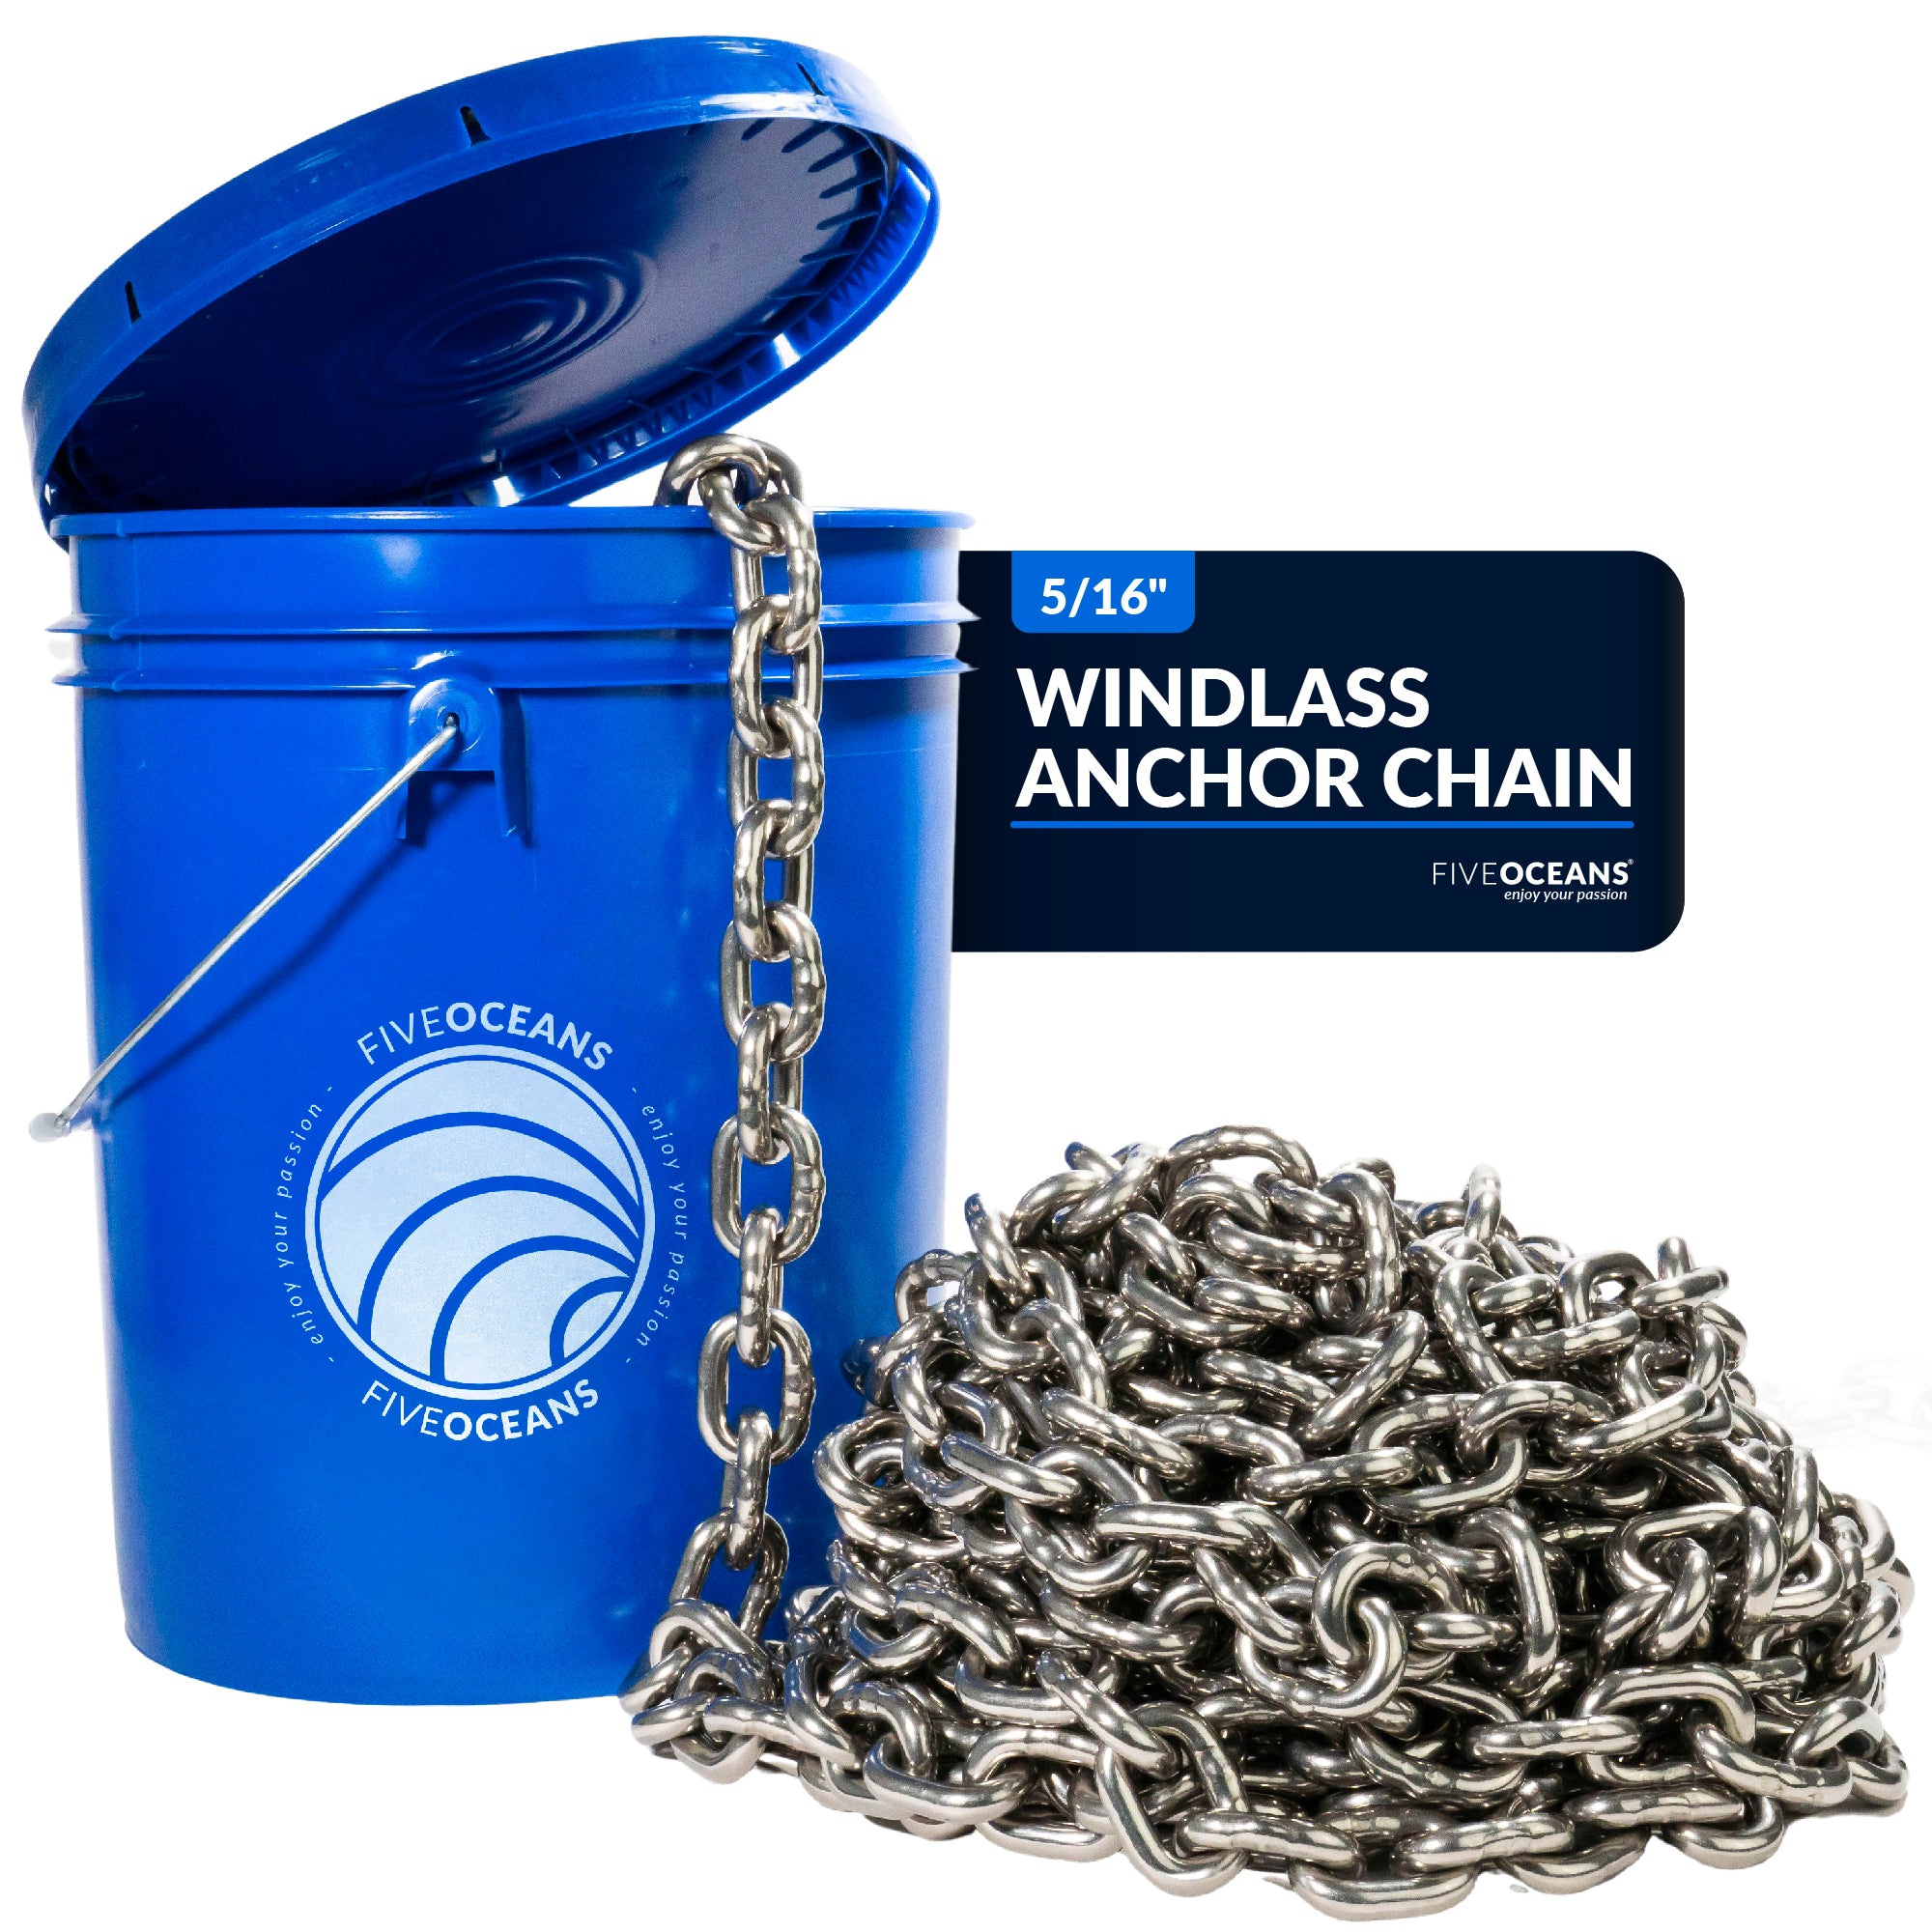 5/16" Boat Windlass Anchor Chain HT G4 Stainless Steel - FO4493